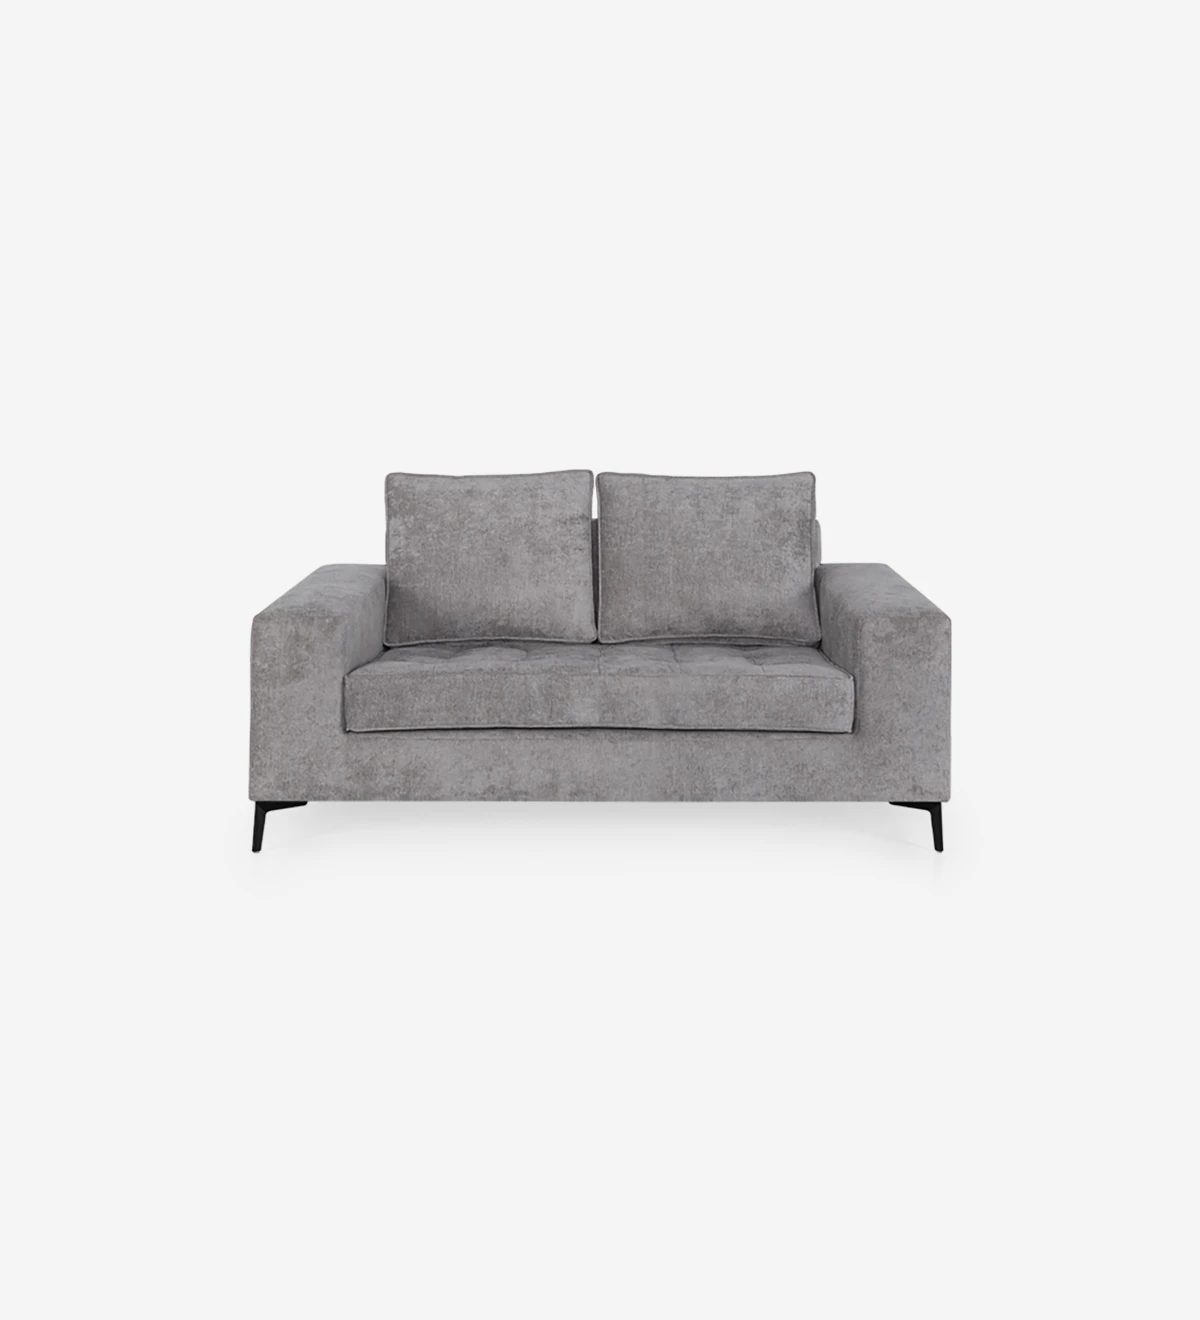 Barcelona 2-seater sofa upholstered in gray fabric, black lacquered metal feet, 165 cm.